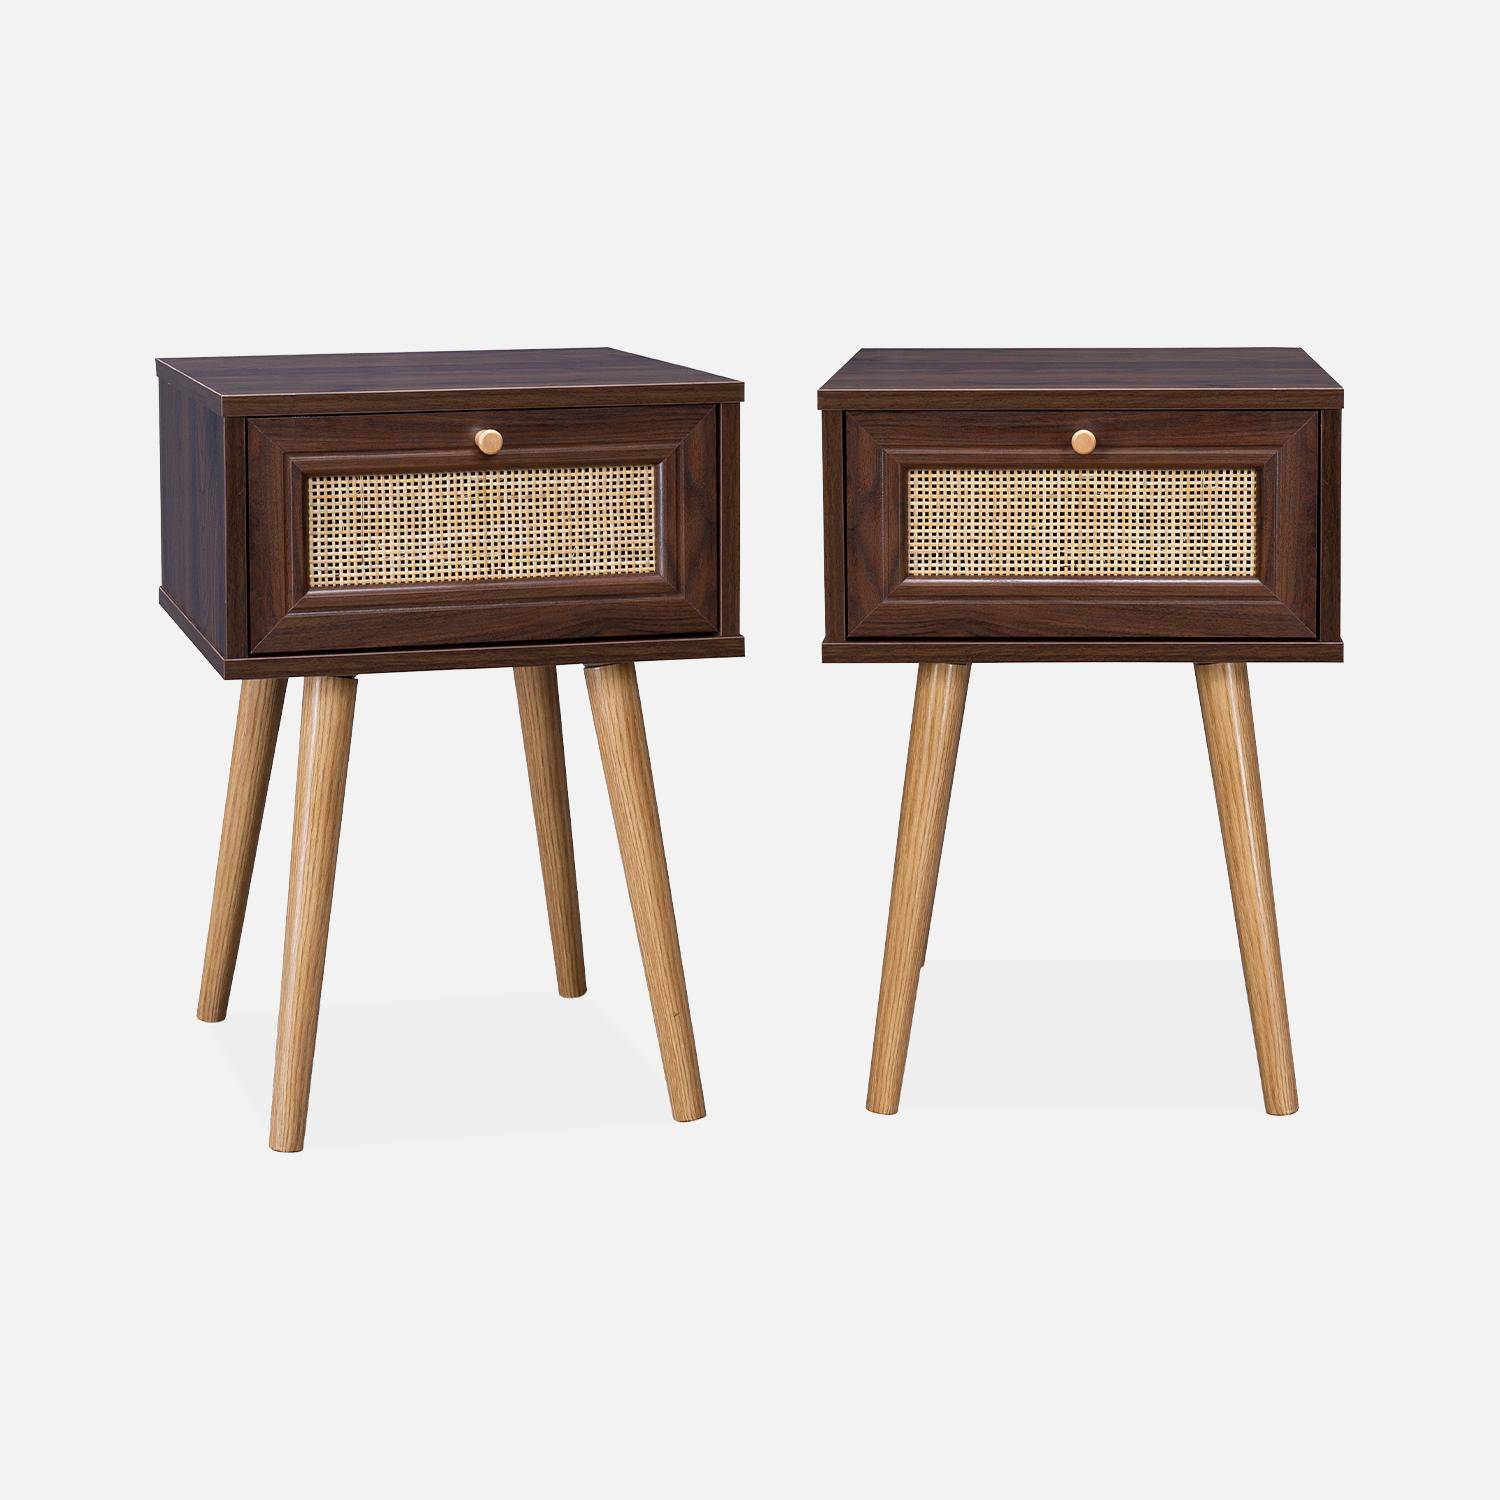 Set of 2 dark wood and cane effect bedside tables with 1 drawer Photo3